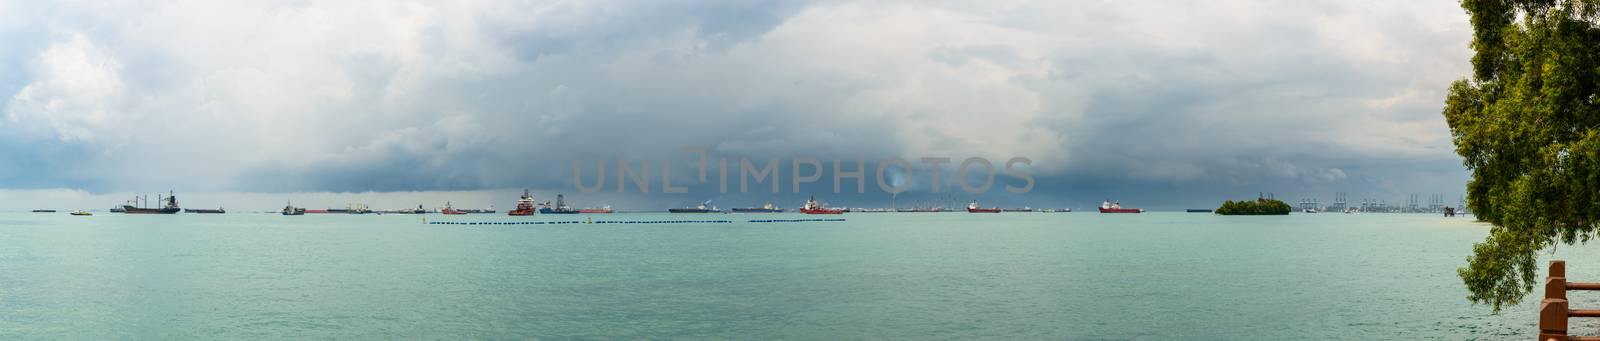 Panoramic view of the Singapore Strait by dutourdumonde